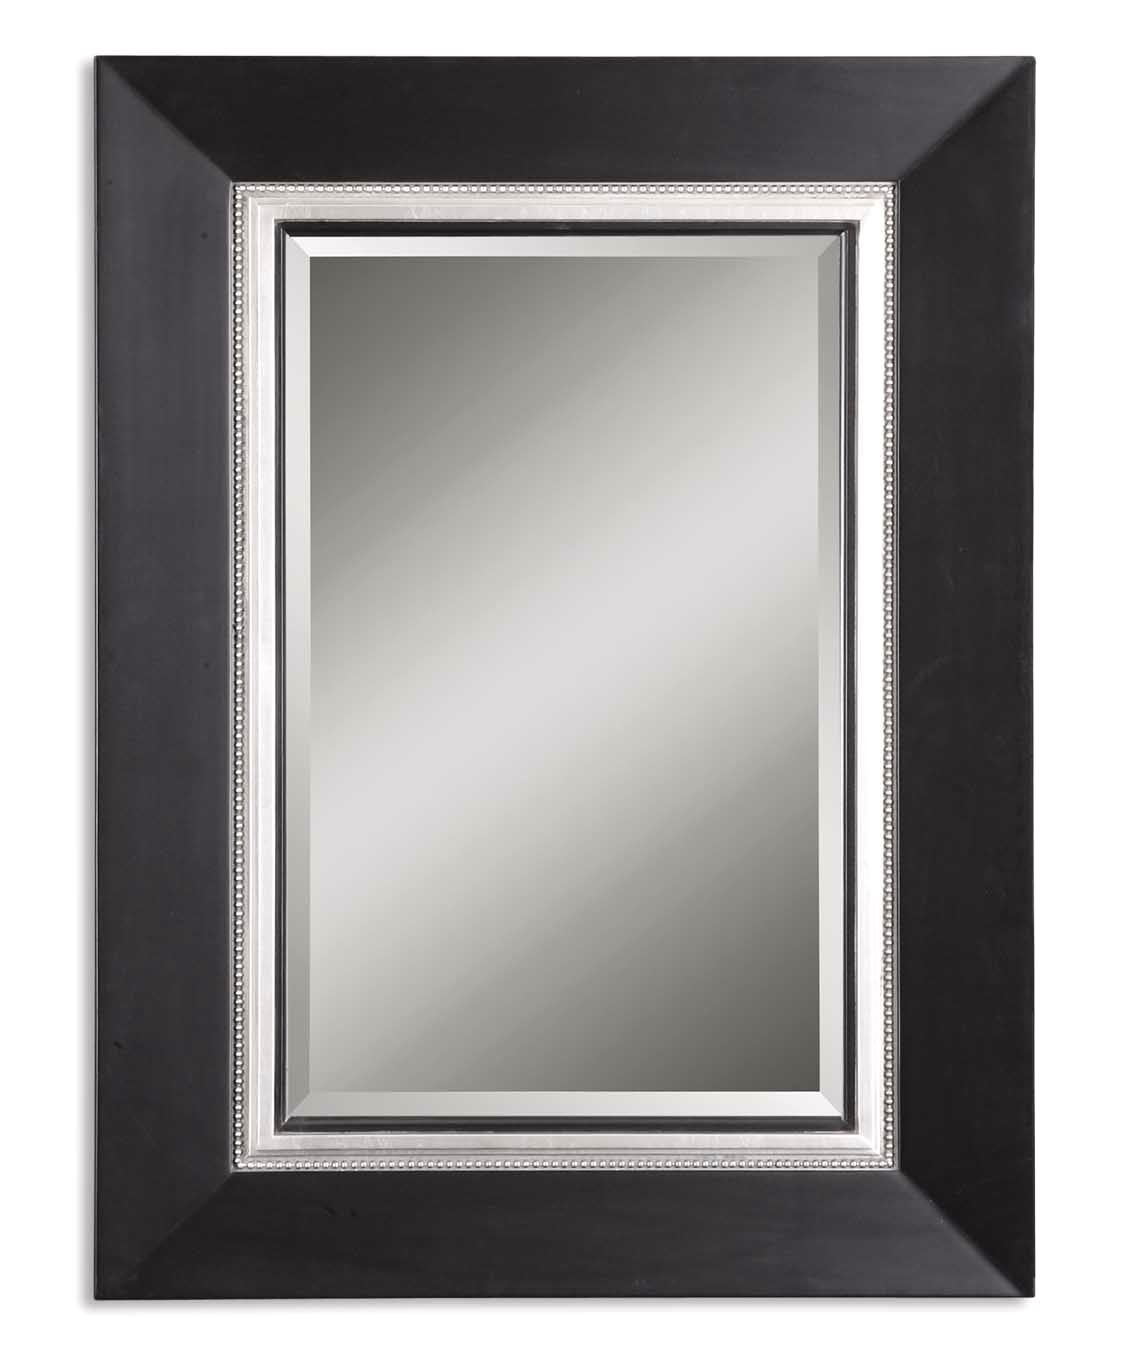 Whitmore Traditional Matte Large Black Silver Rectangular Mirror With Within Matte Black Rectangular Wall Mirrors (View 3 of 15)